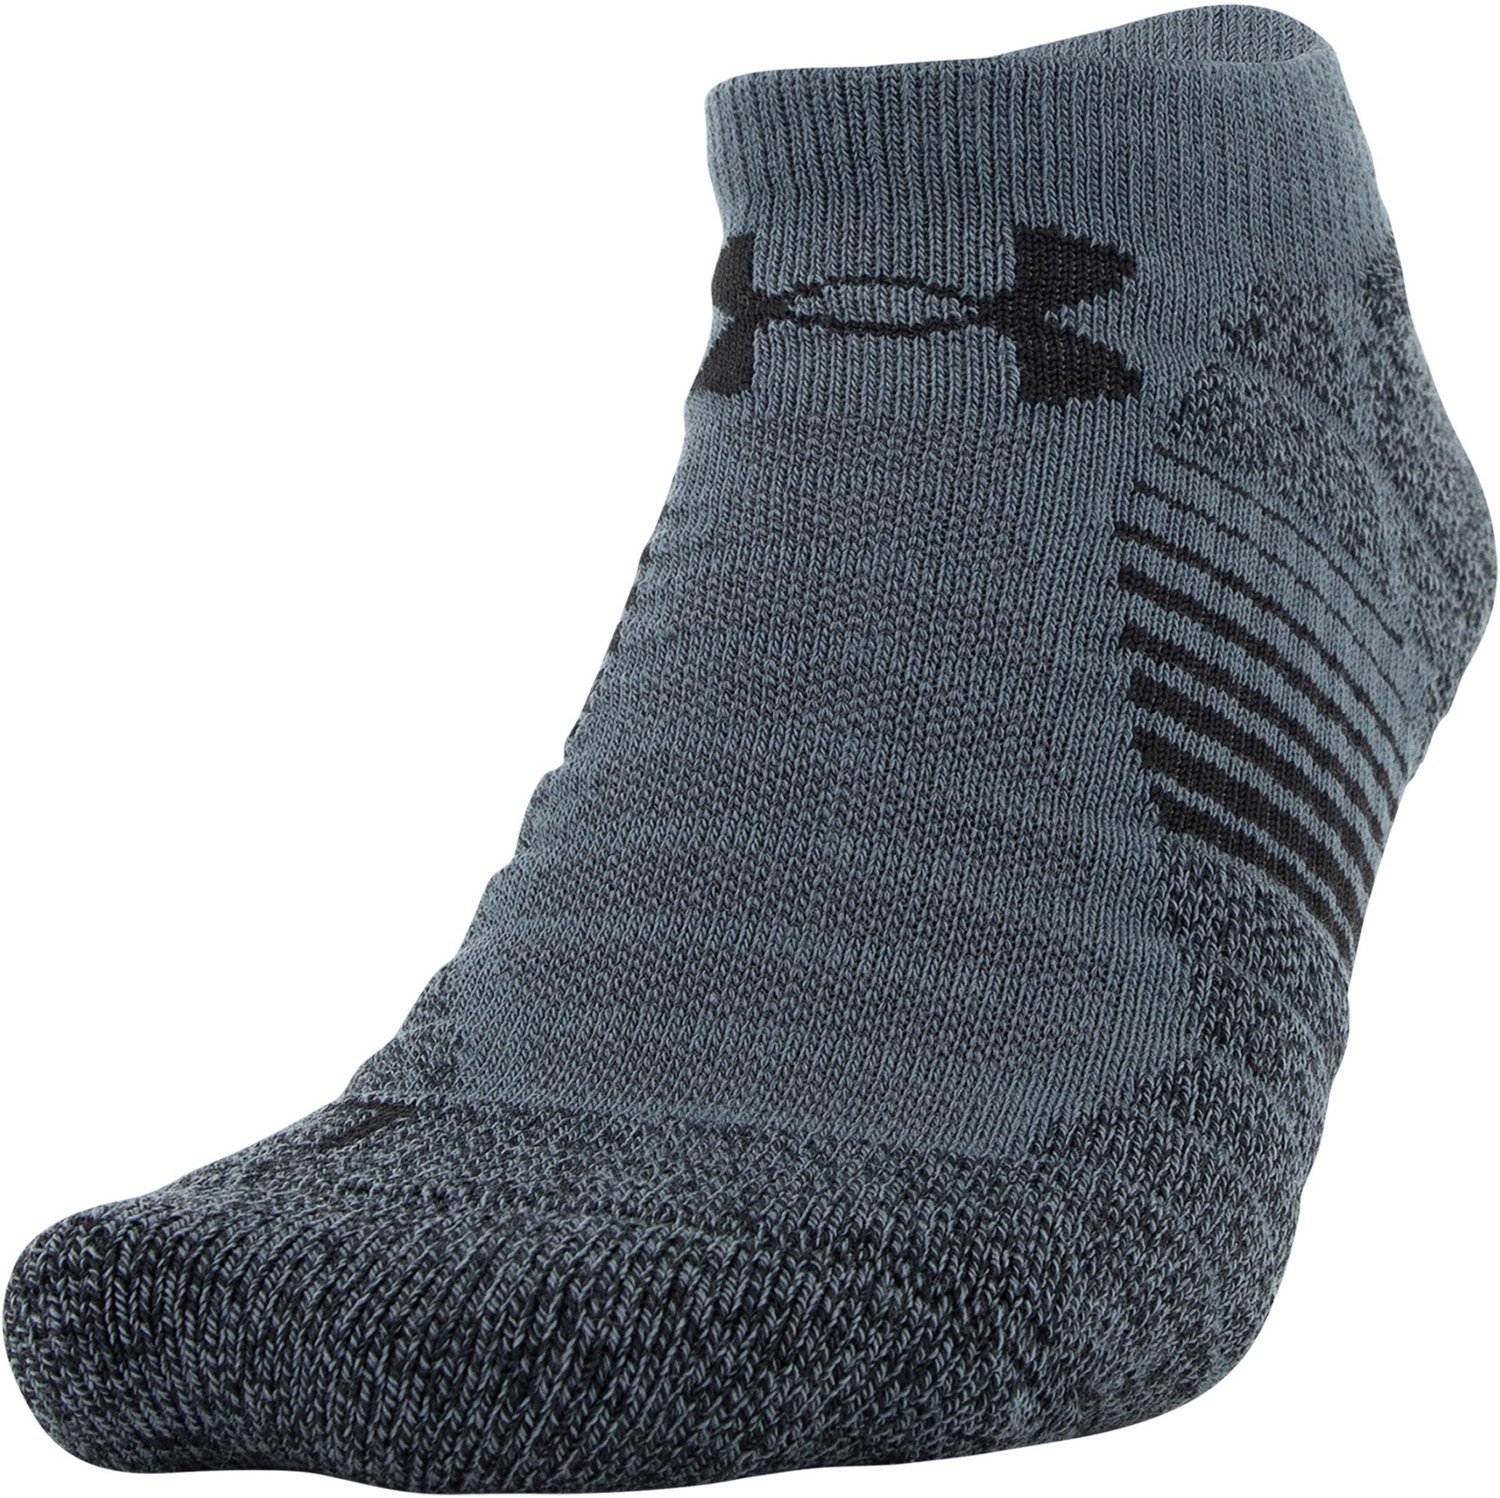 Under Armour Elevated Performance No Show Socks 3 Pack